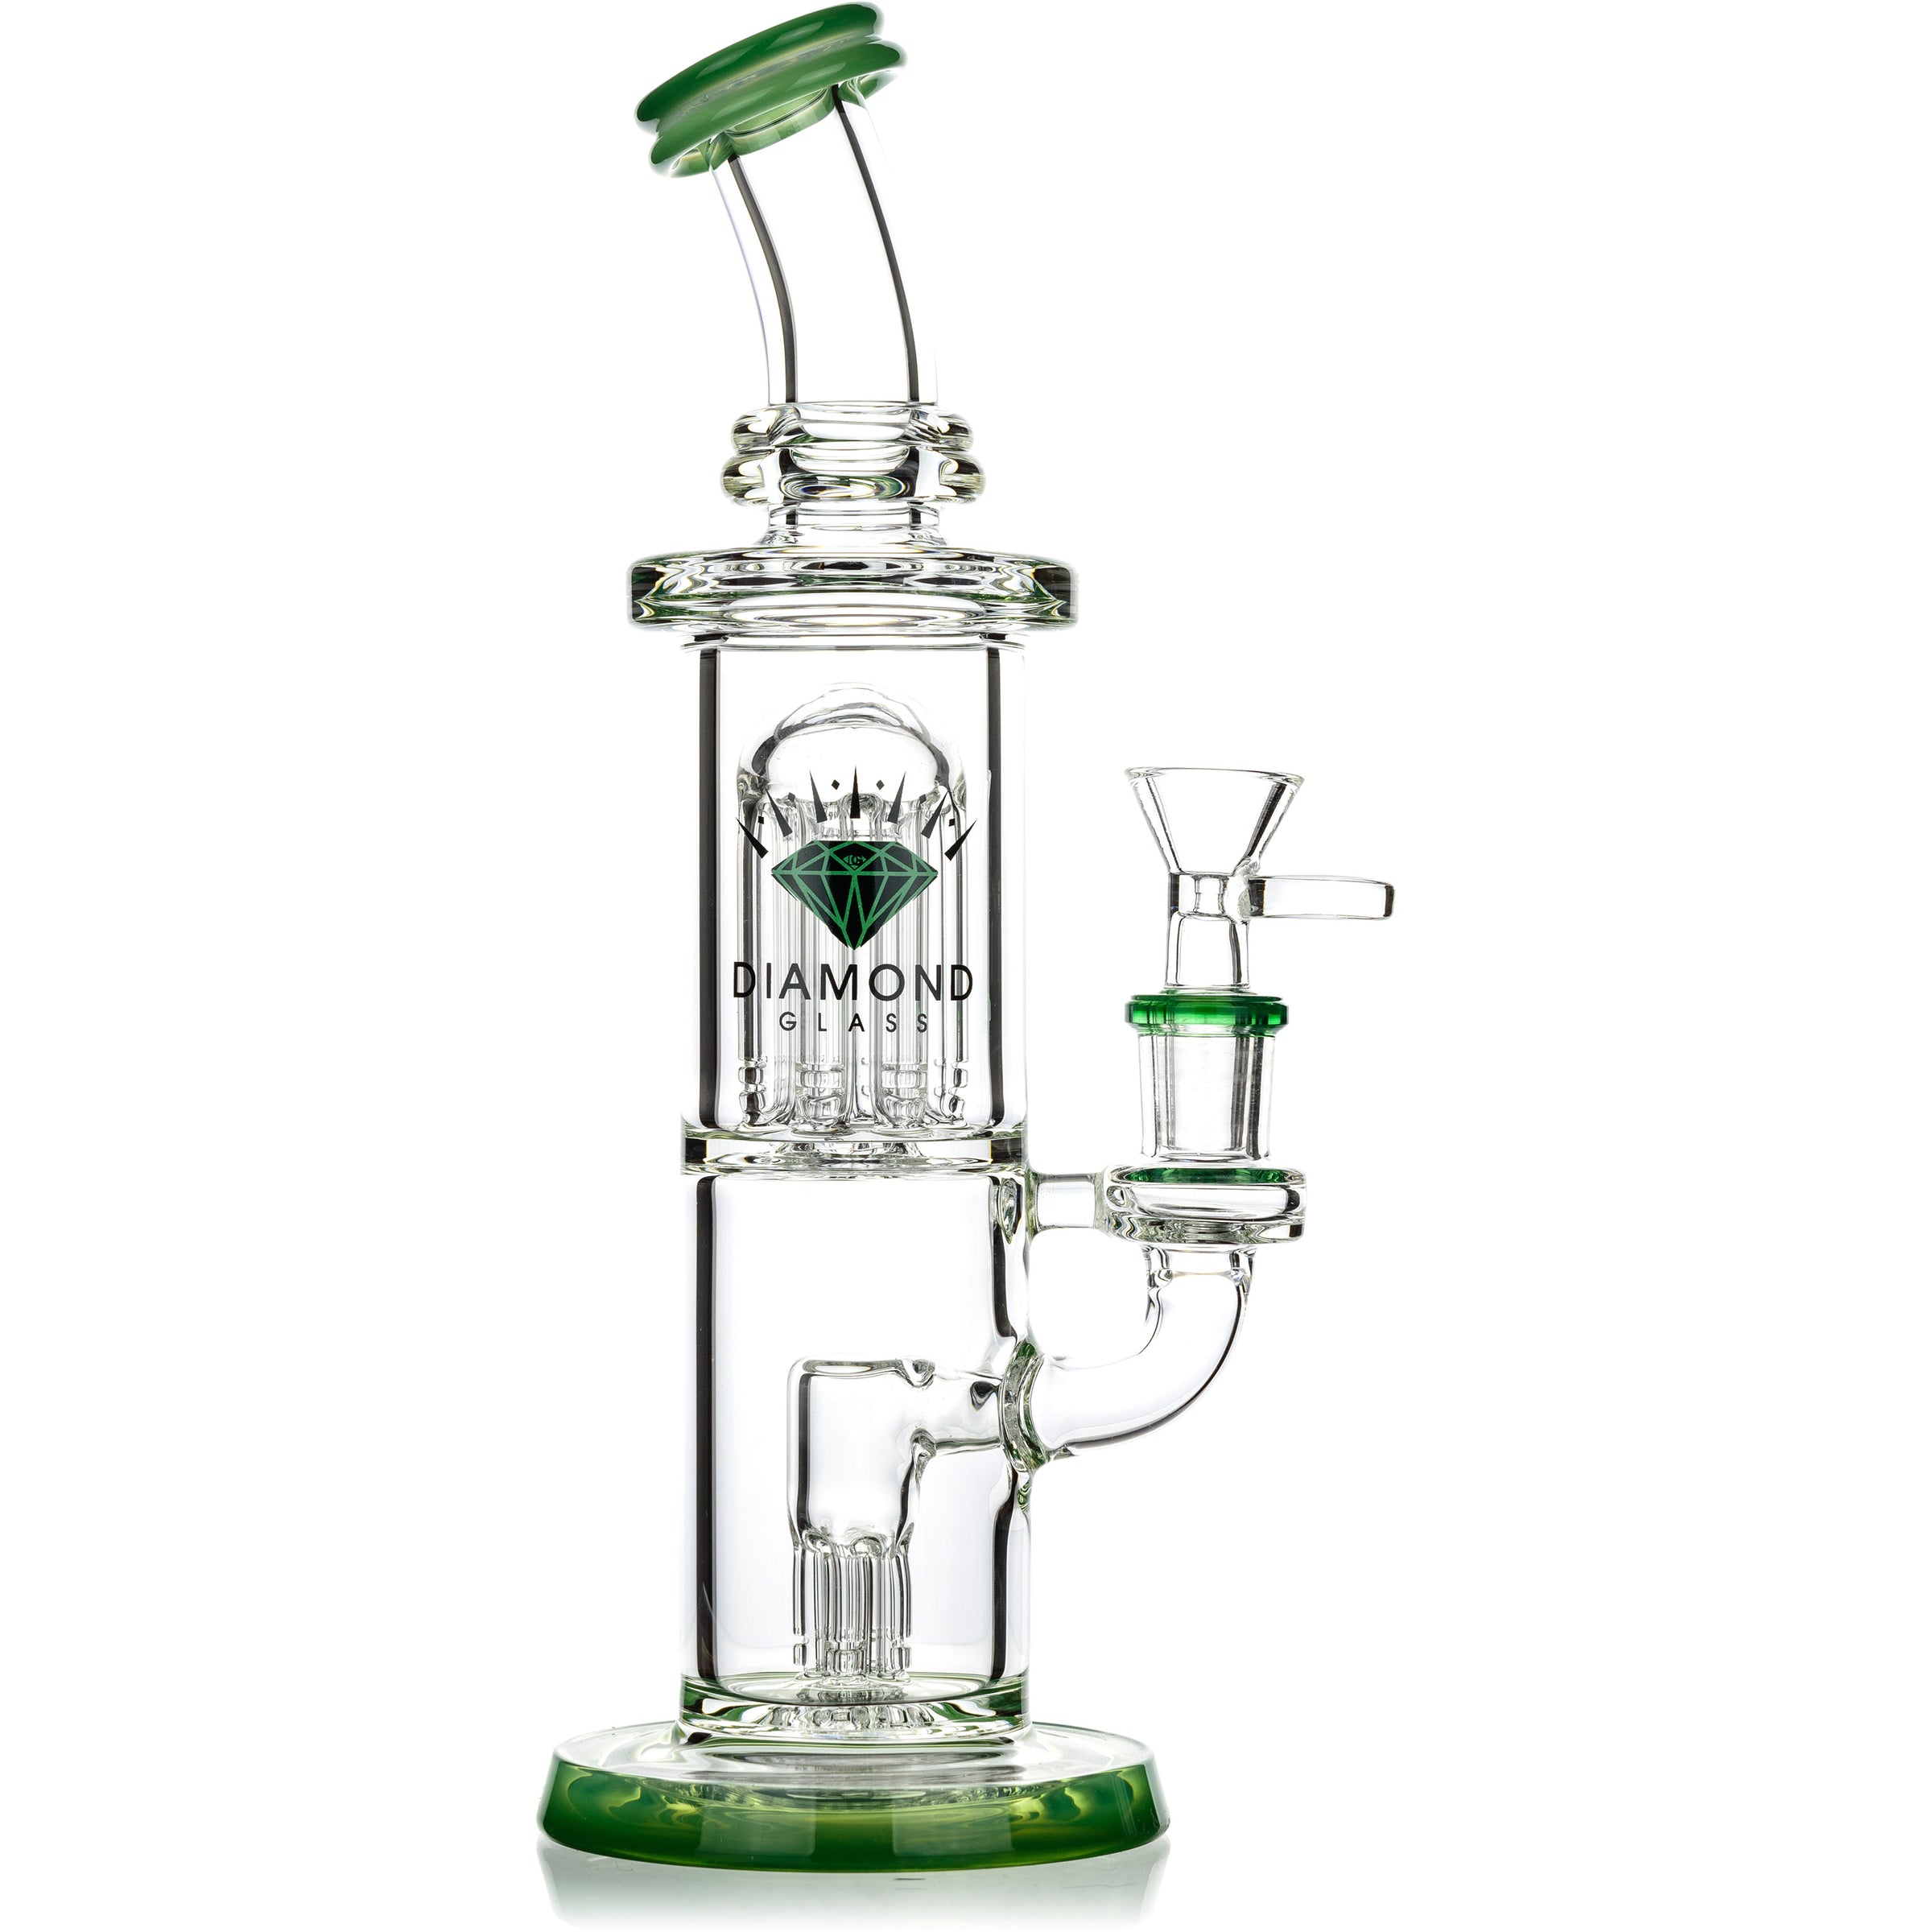 Diamond Trophy Rig with Double Percs, by Diamond Glass (free